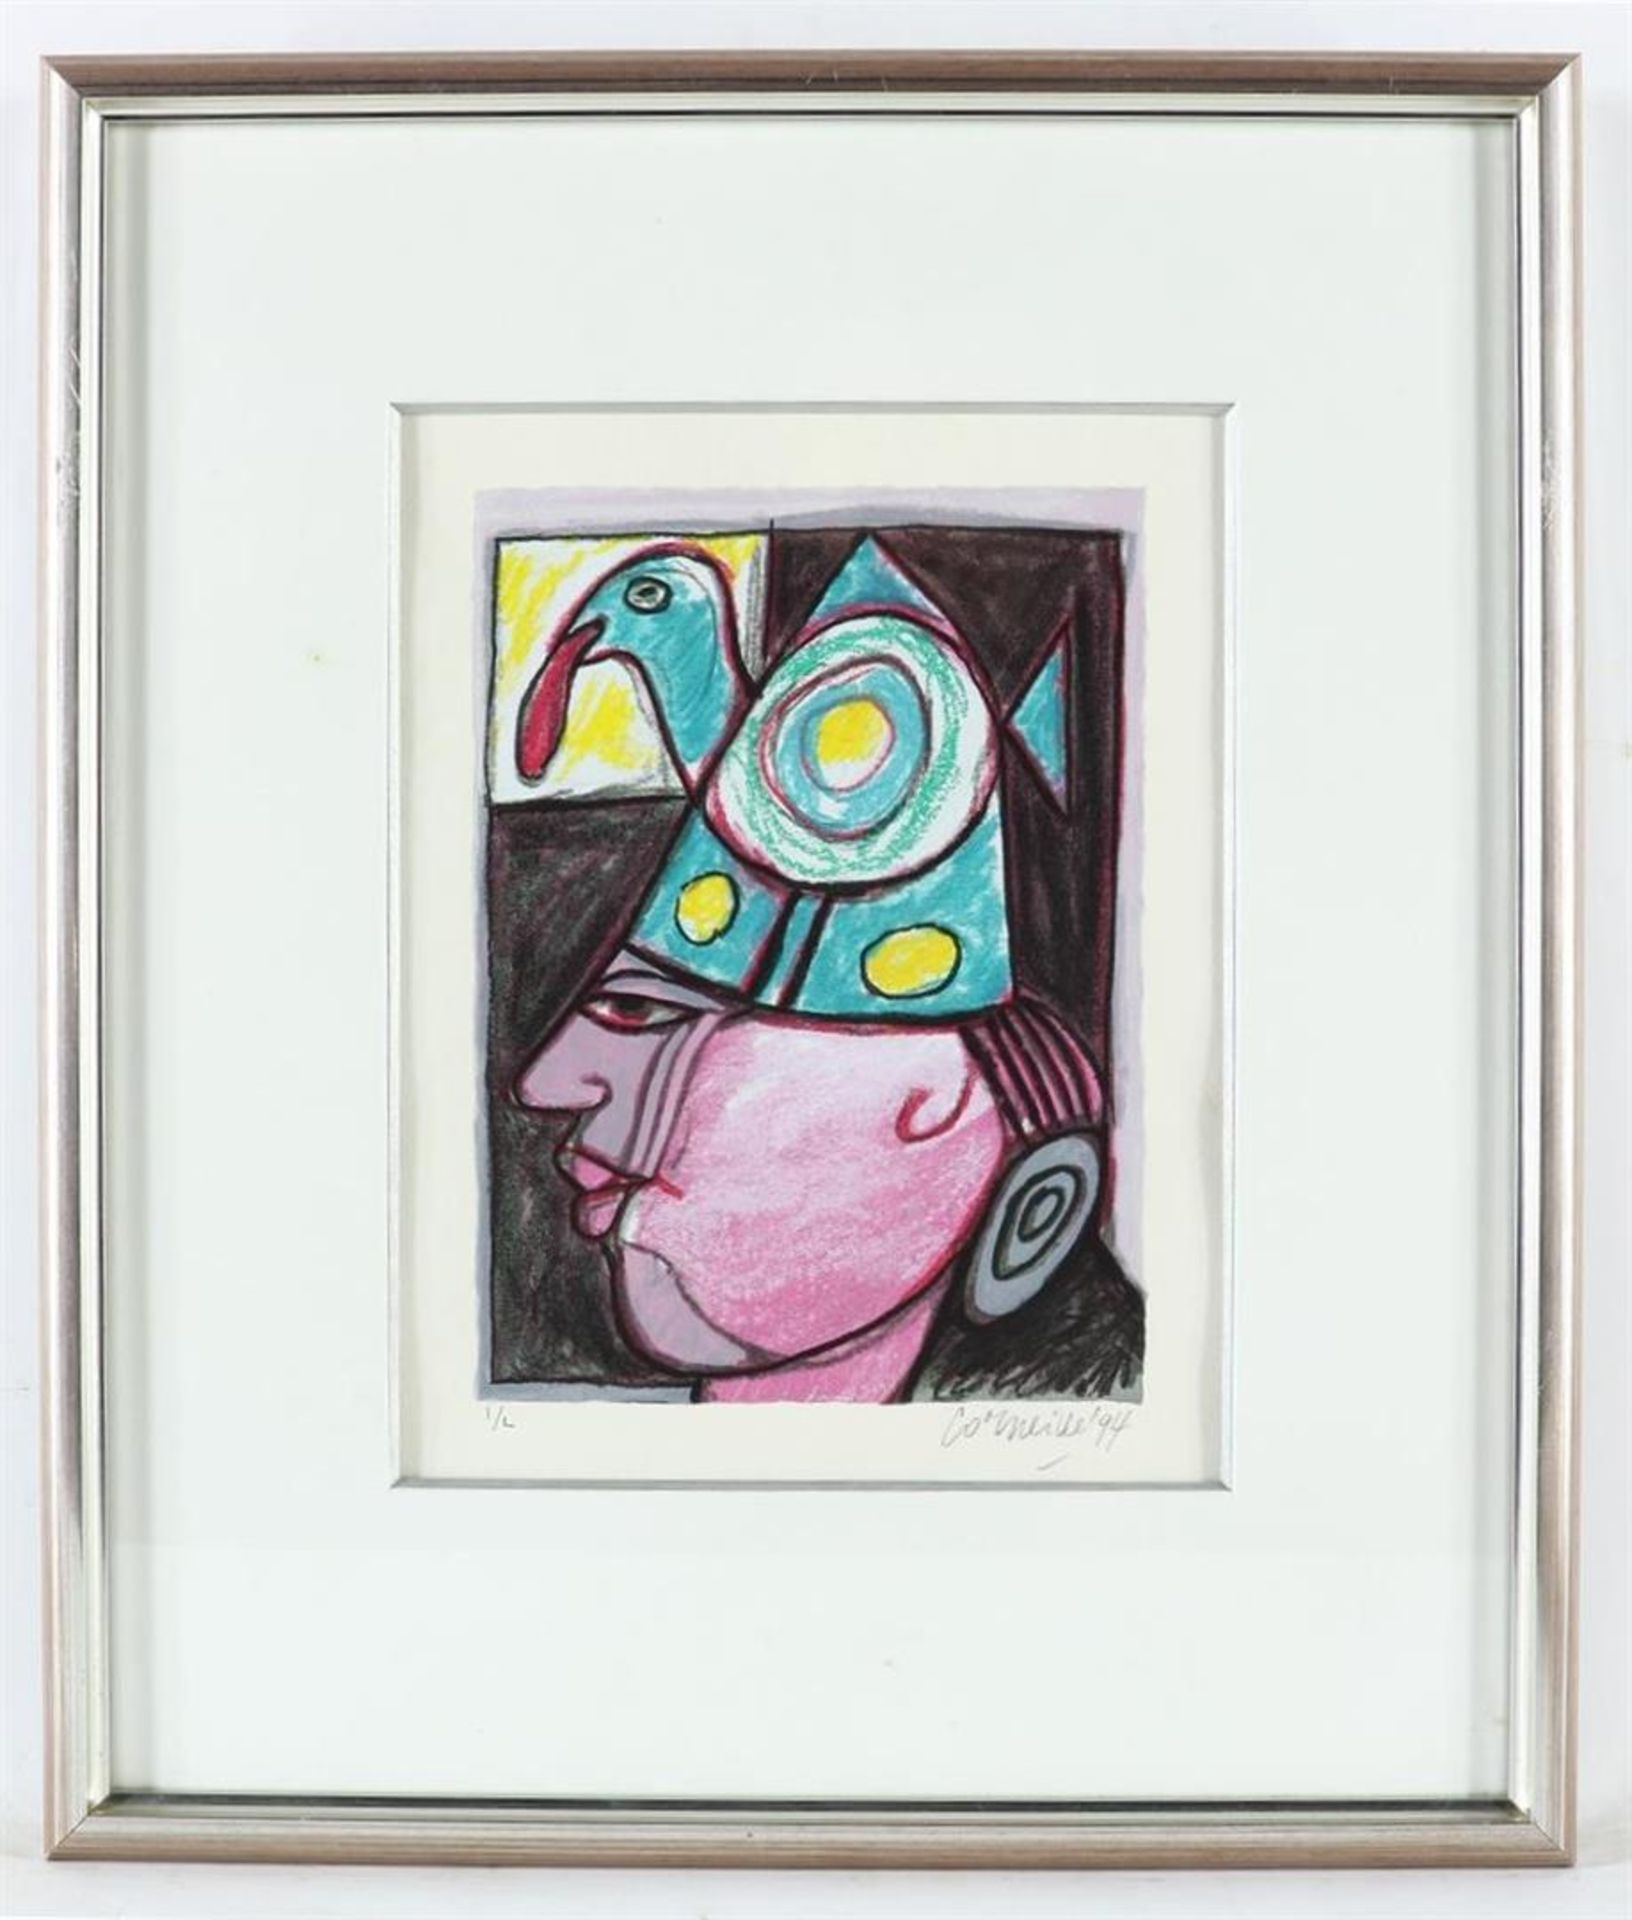 Corneille (Cornelis Guillaume van Beverloo) (1922-2010) Clown, signed lower right and dated '94, - Image 2 of 4